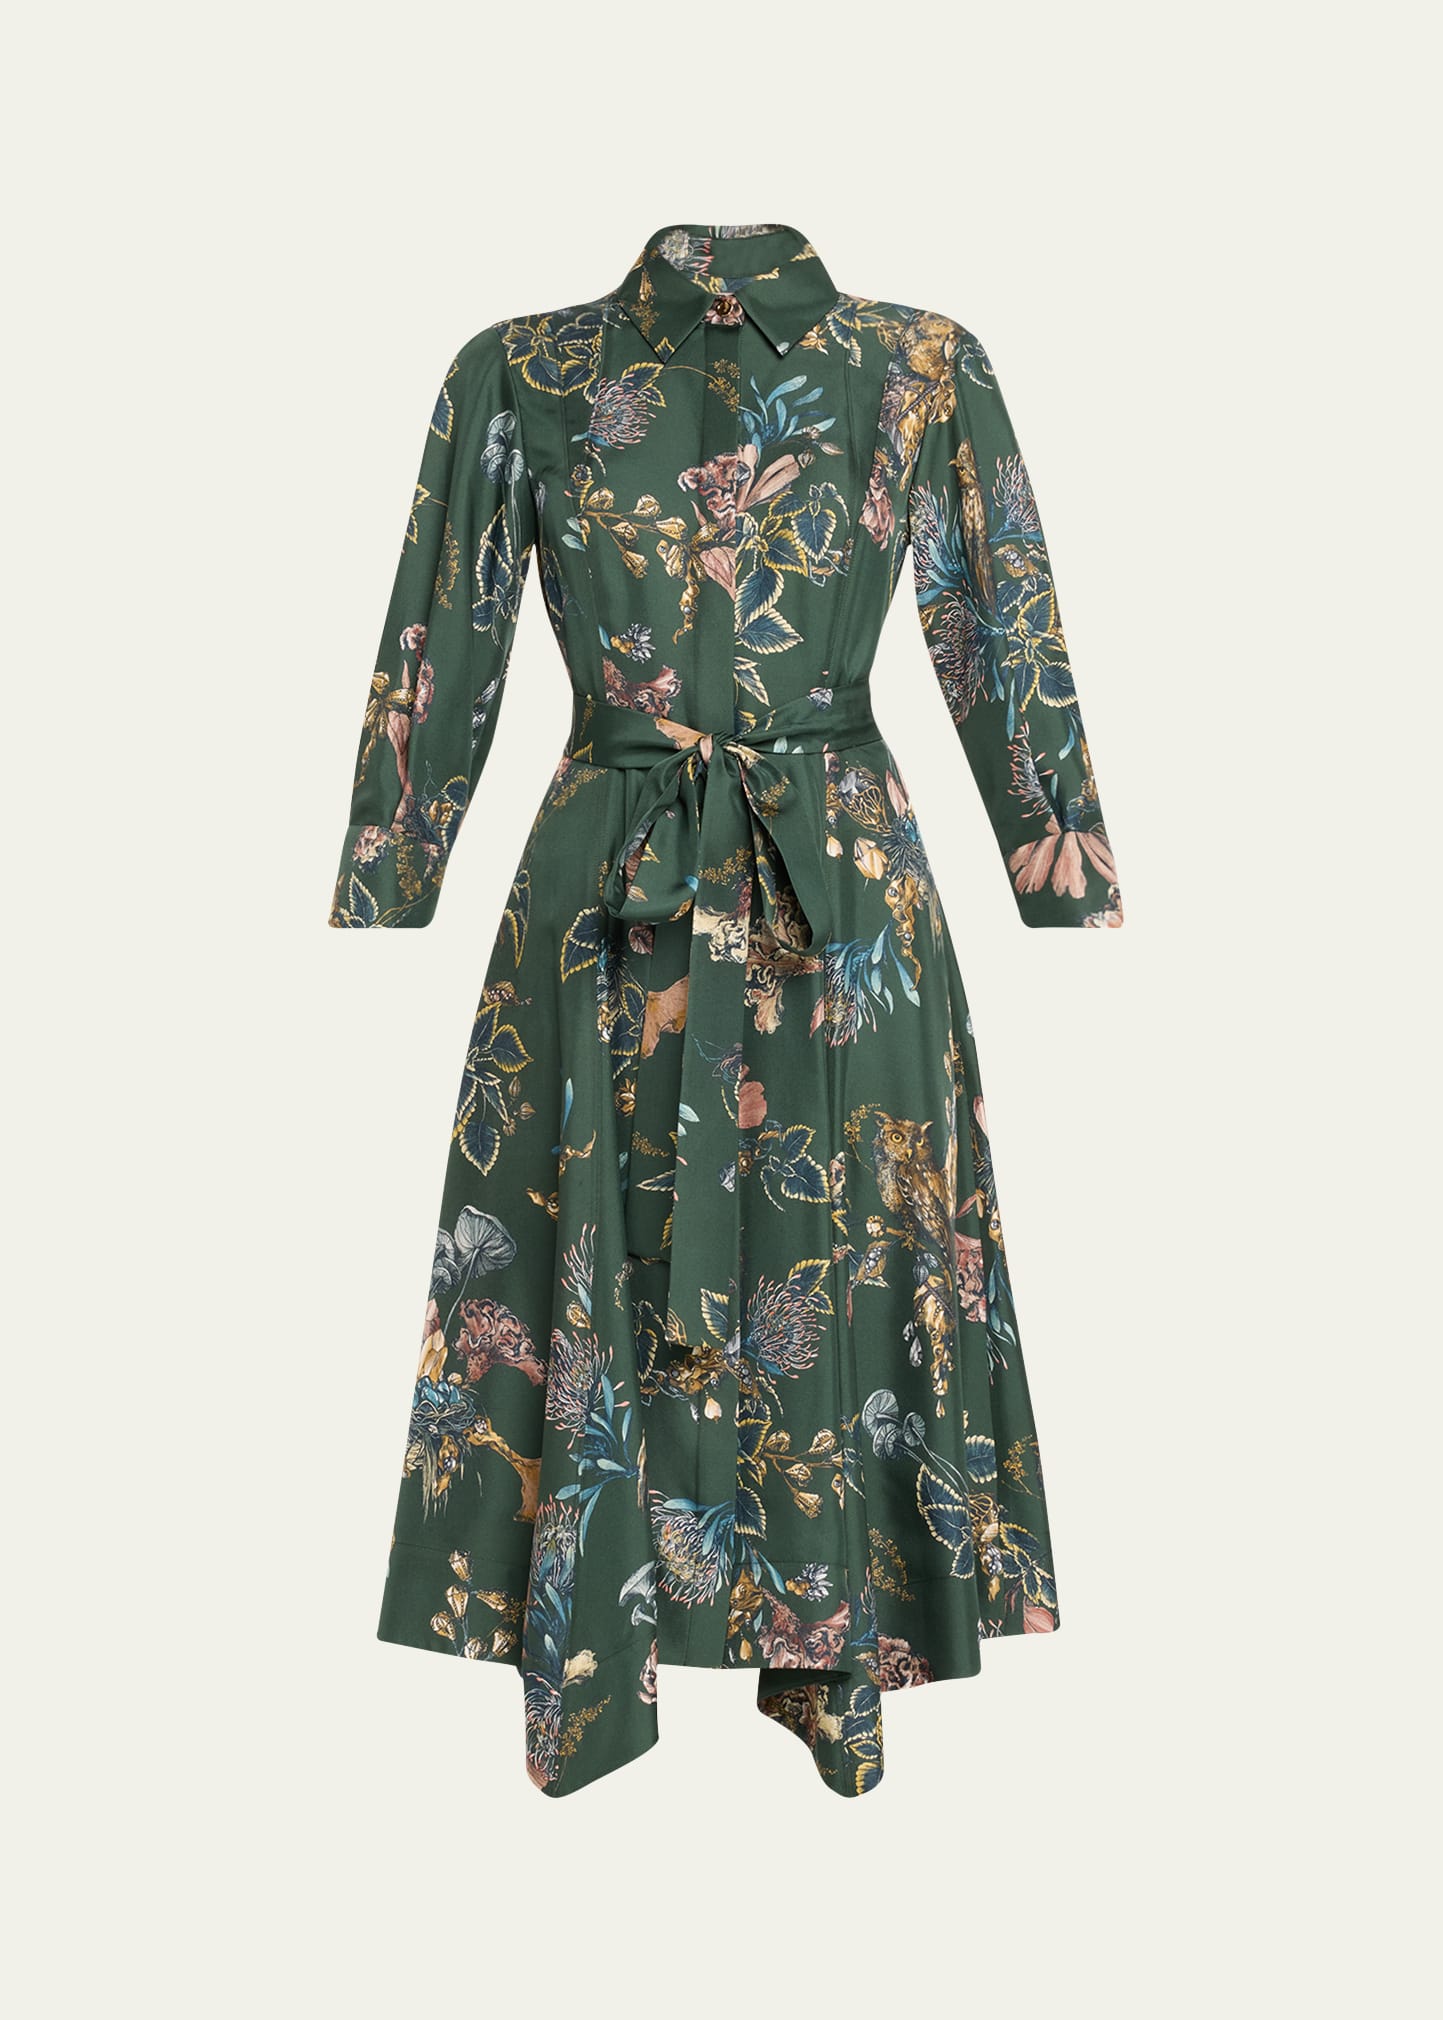 Jason Wu Collection Forest Floral Belted Silk Twill Shirtdress, Green In Blue